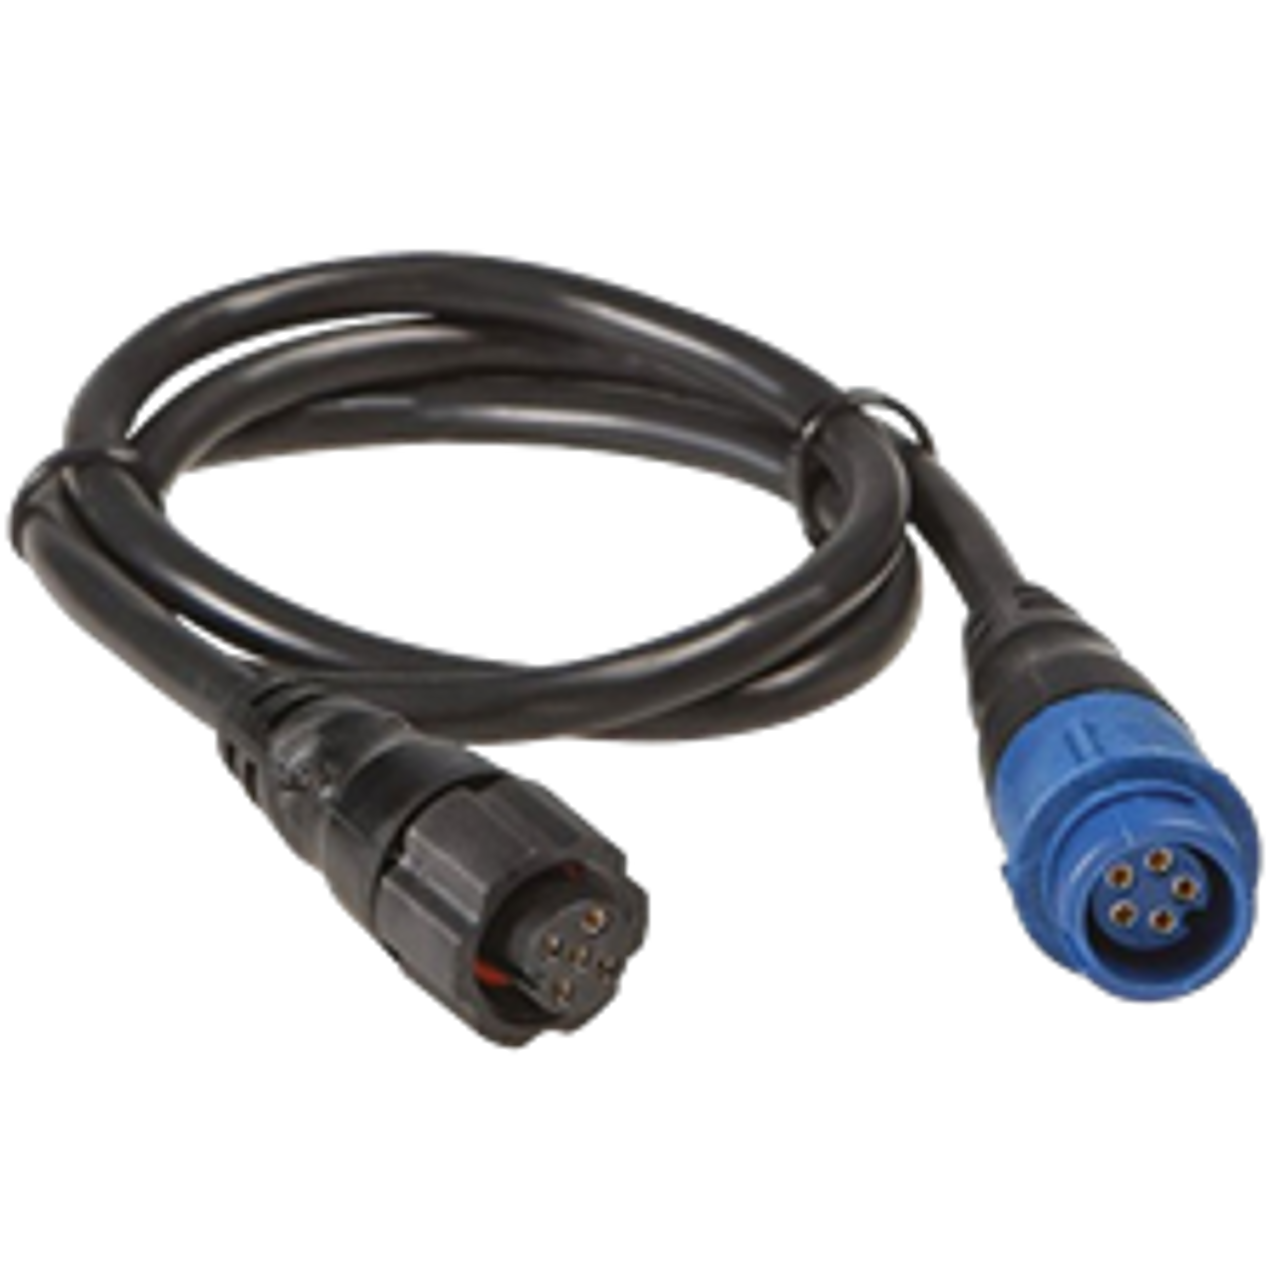 Lowrance 000-00022-001 Transducer Adapter Cable: 7-pin blue to 6